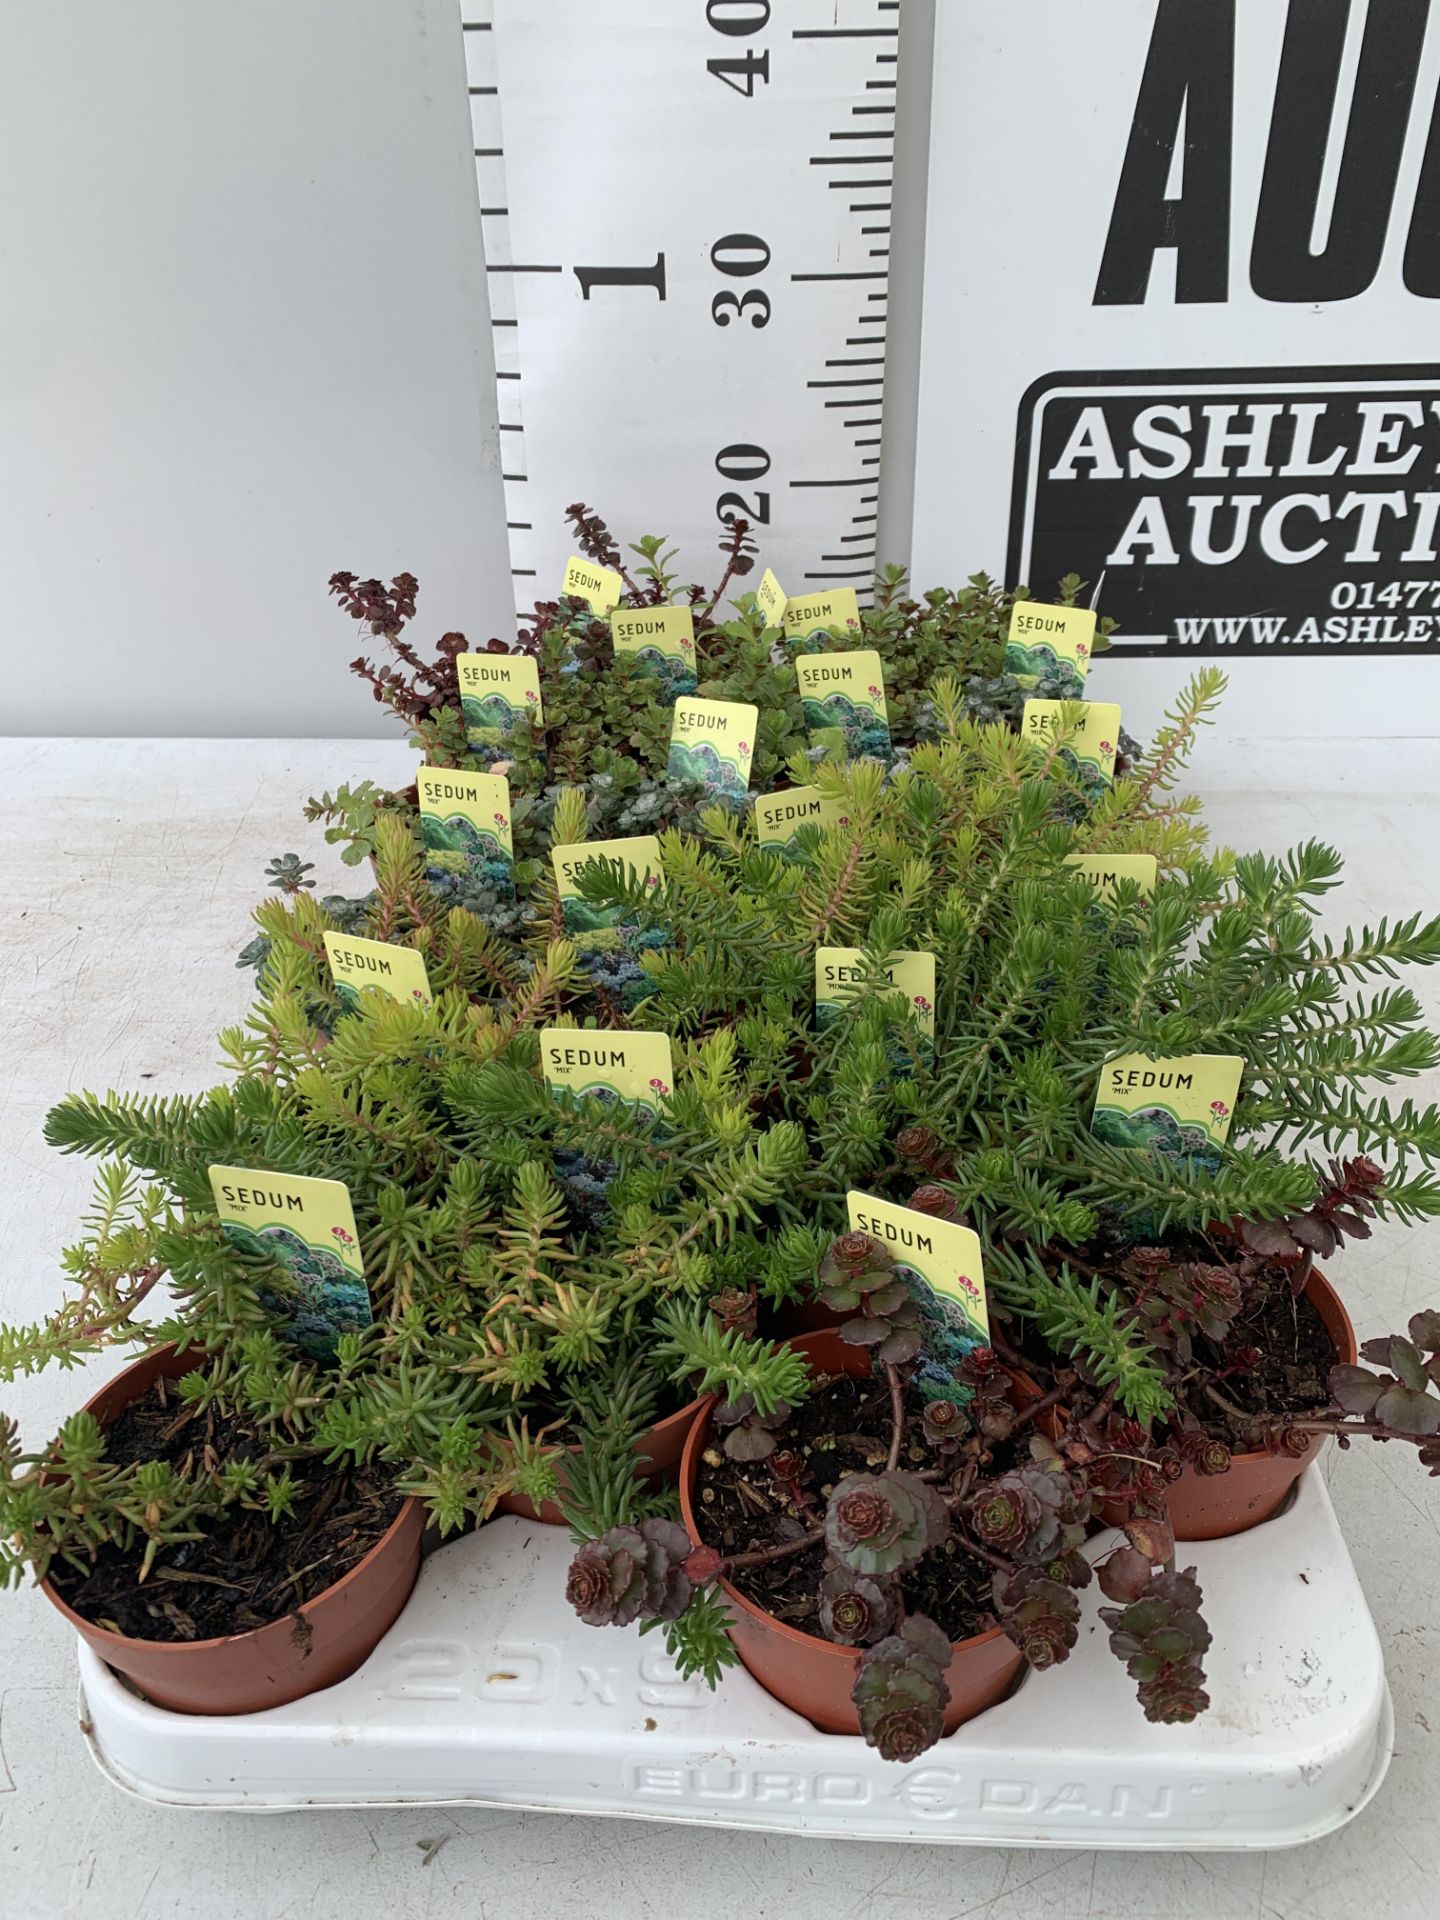 TWENTY MIXED SEDUMS ON A TRAY PLUS VAT TO BE SOLD FOR THE TWENTY